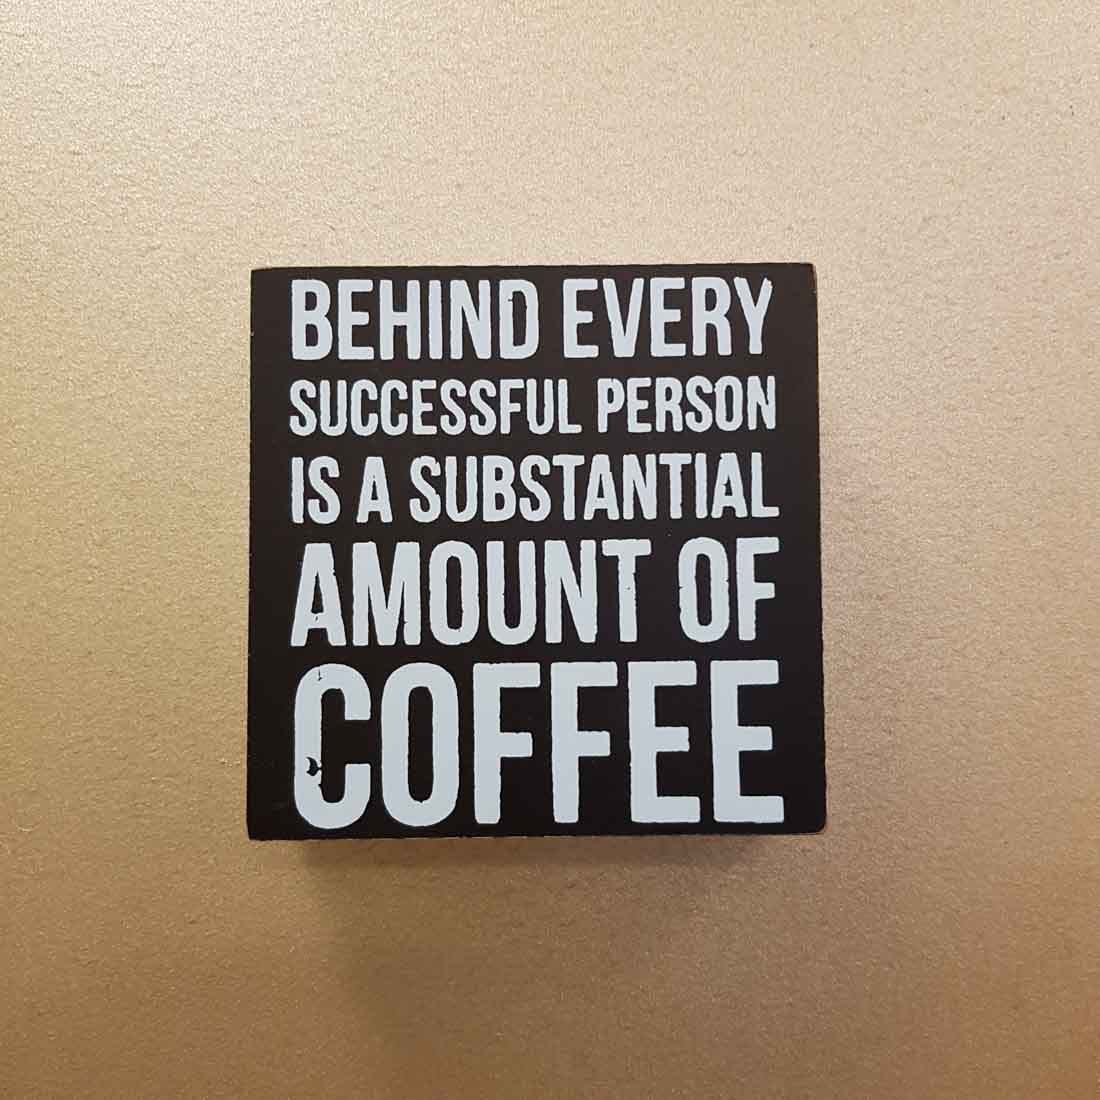 Albums 94+ Images behind every successful person is a substantial amount of coffee Superb